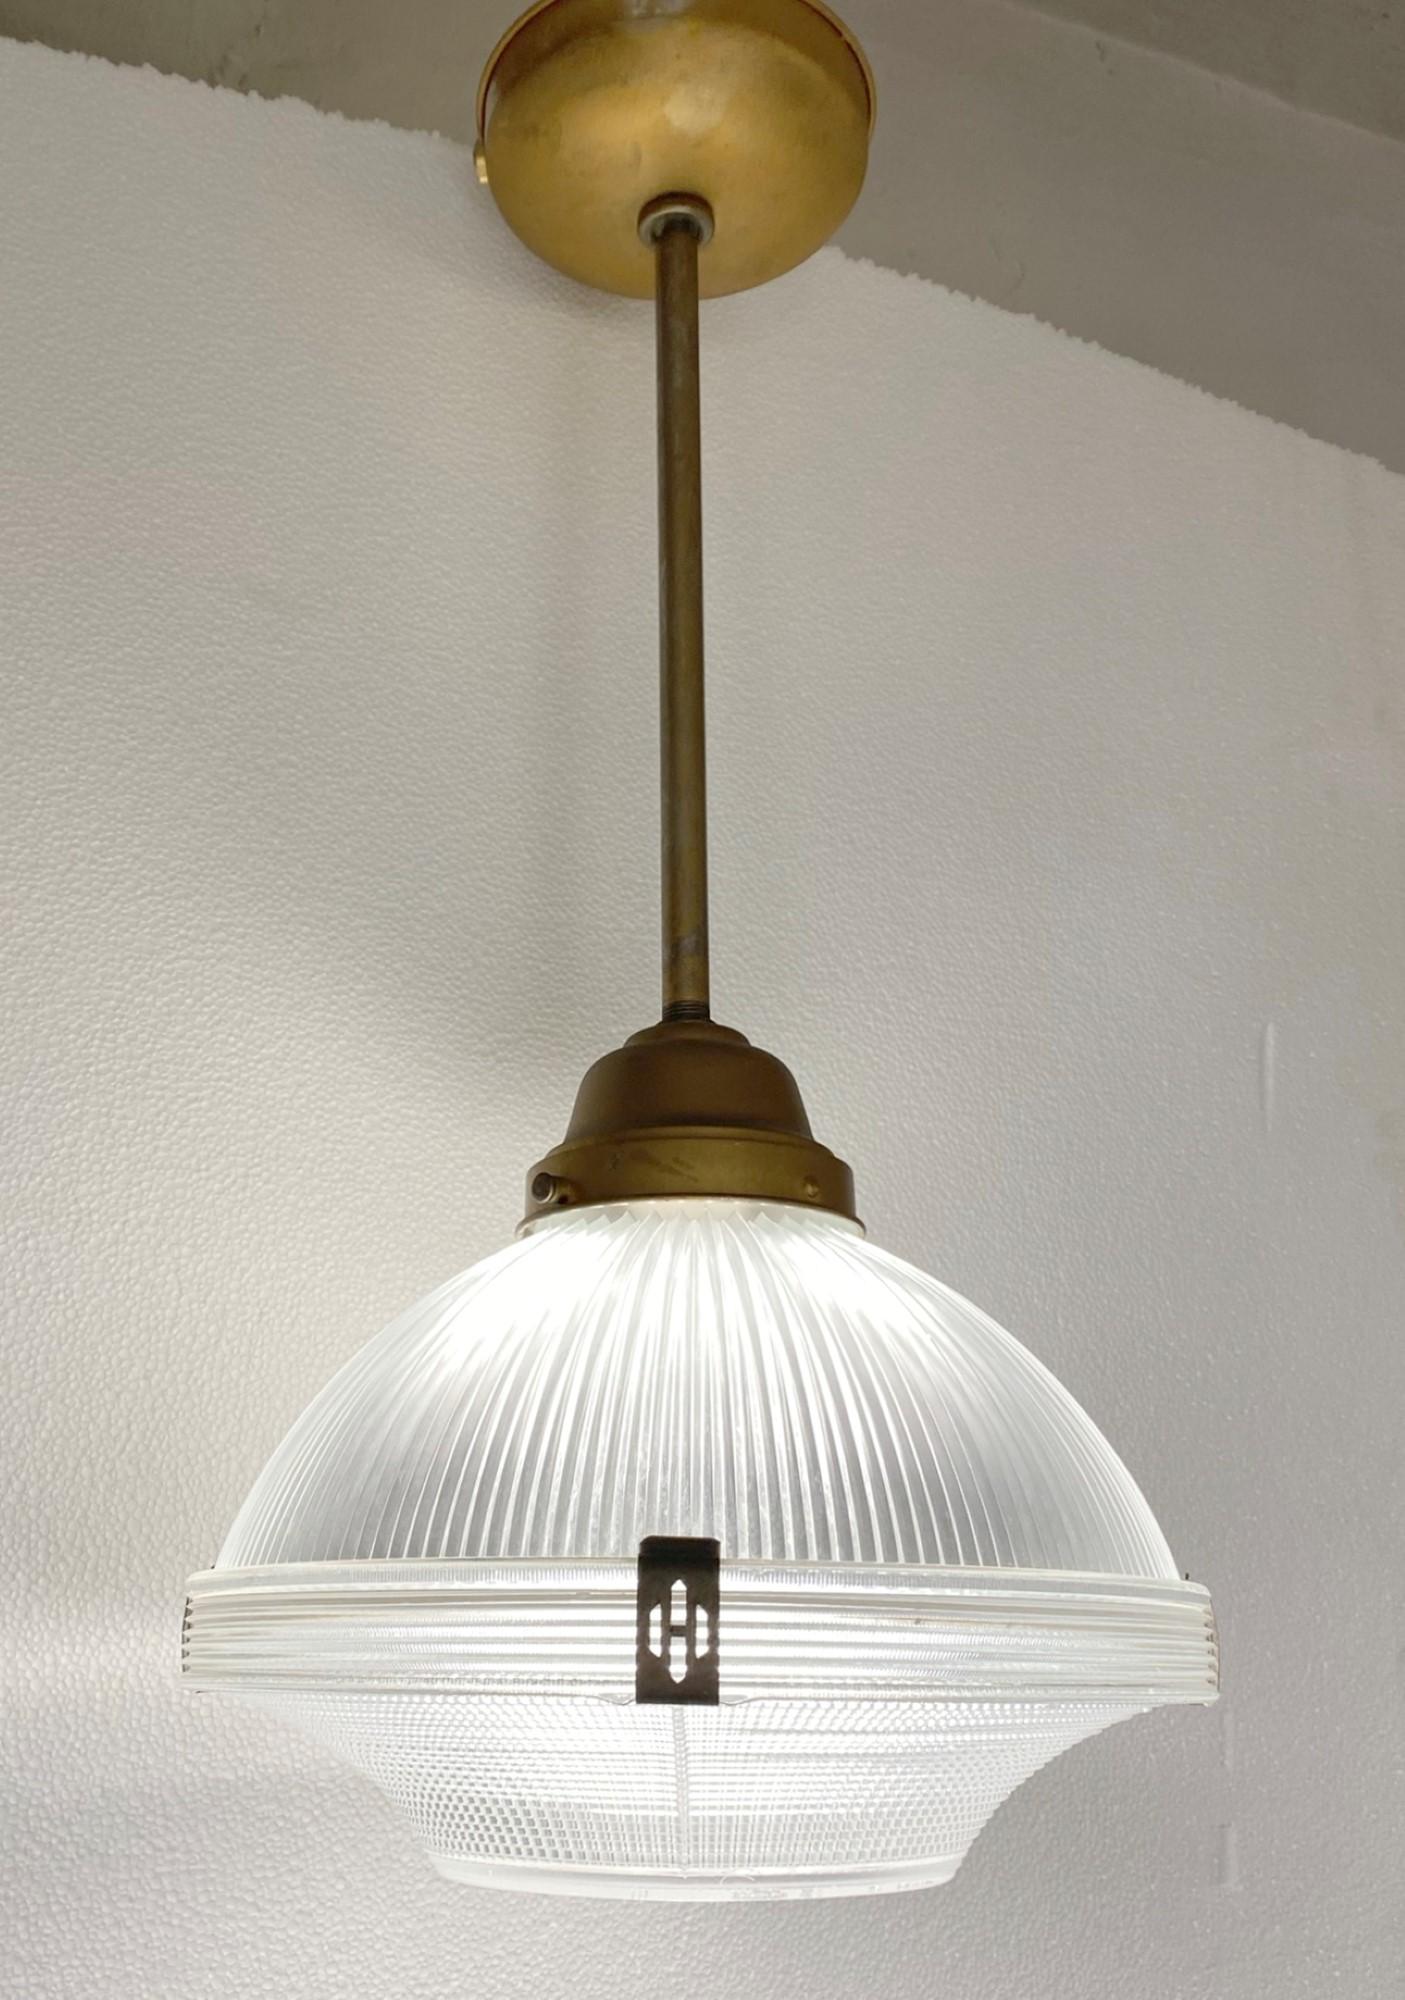 This 1920s prism glass Holophane Industrial pendant light features the original hardware and the original clear prism glass shade. This can be seen at our 2420 Broadway location on the upper west side in Manhattan.